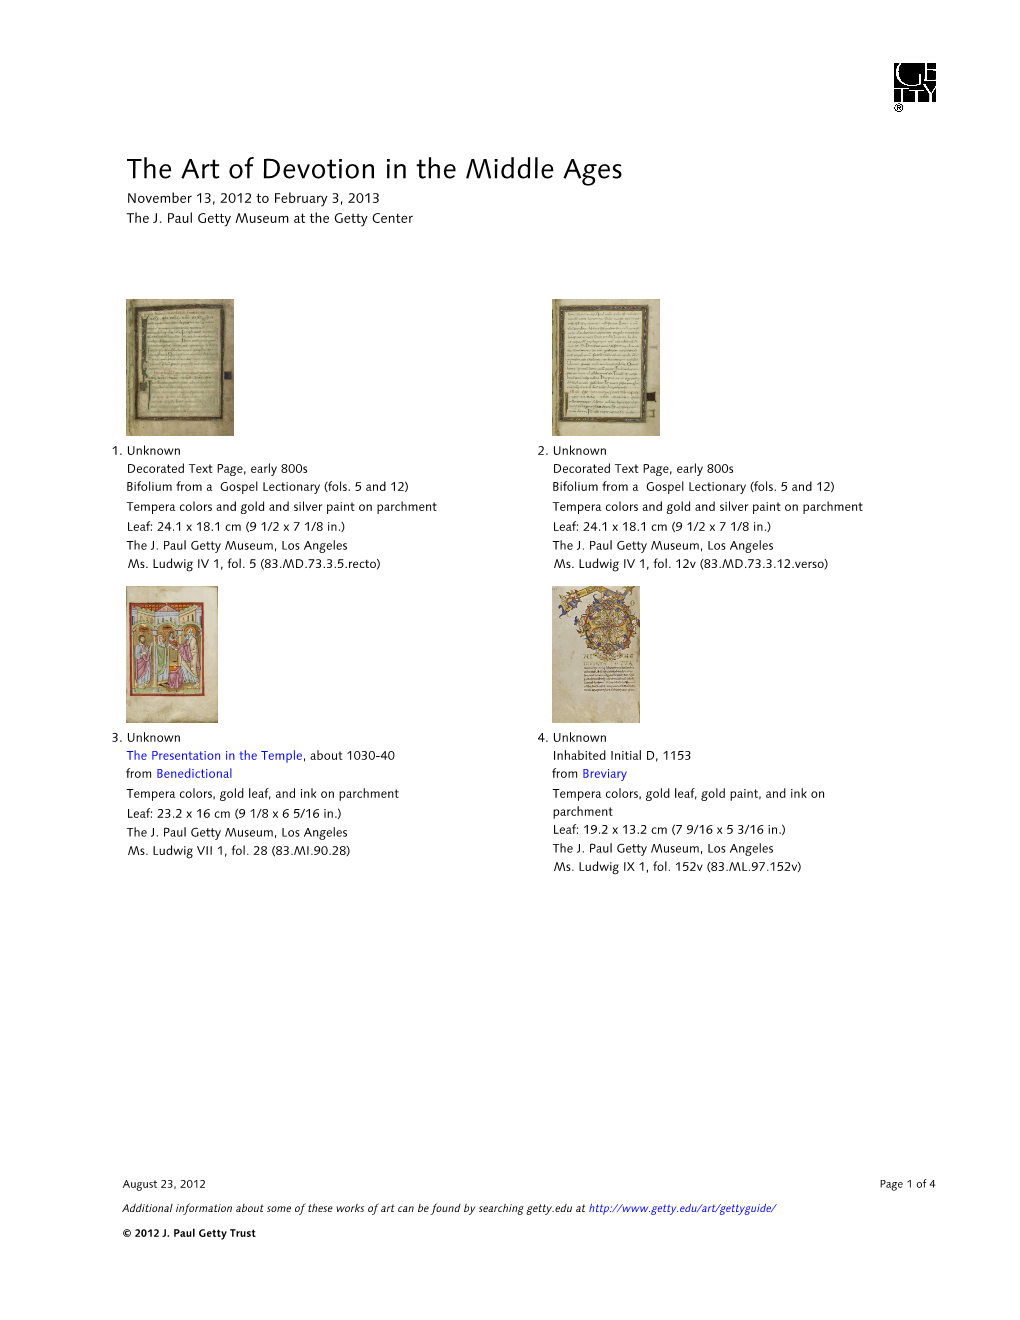 The Art of Devotion in the Middle Ages November 13, 2012 to February 3, 2013 the J